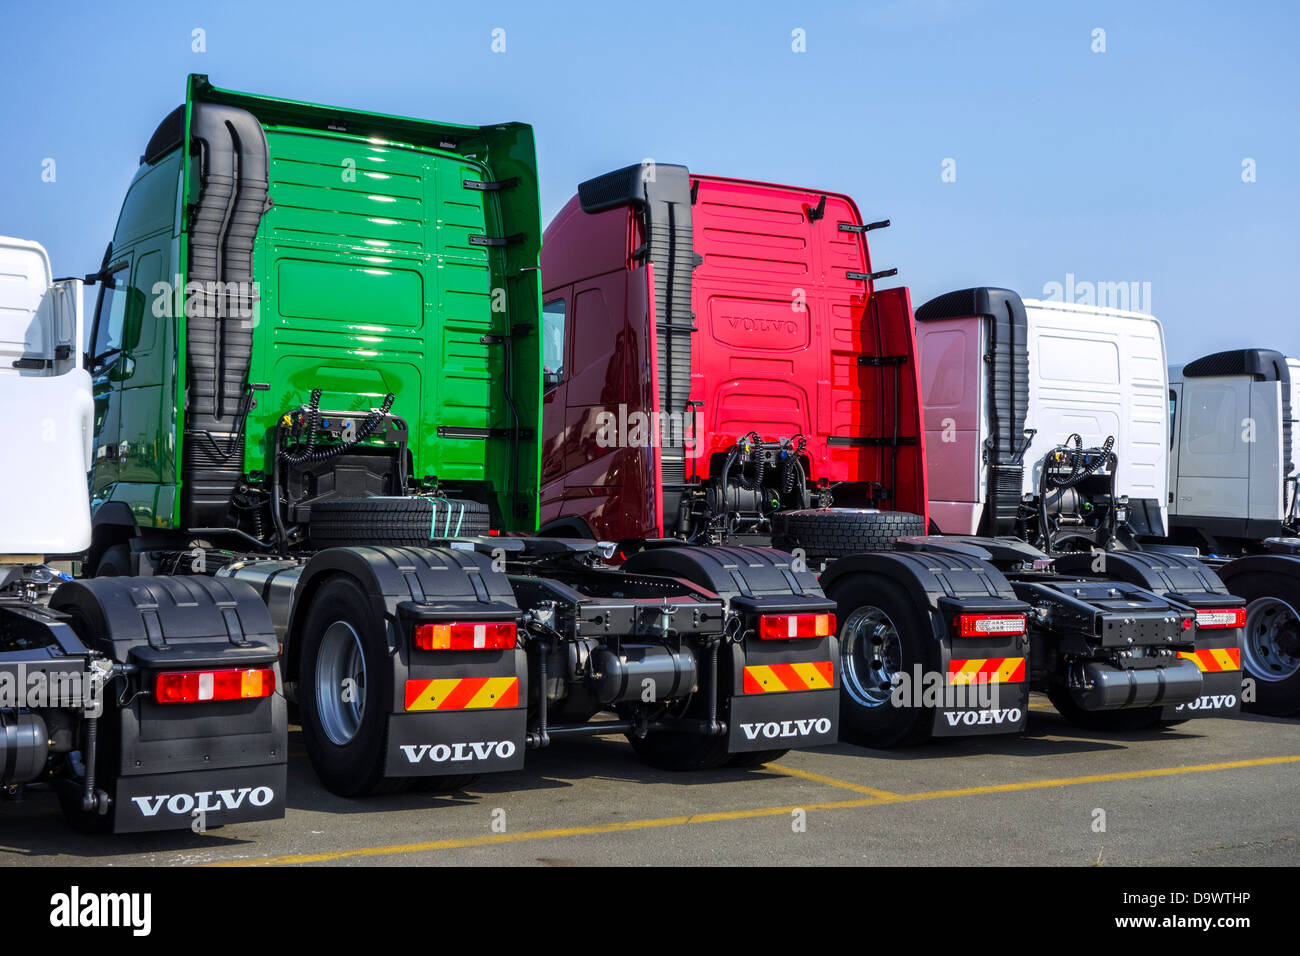 Trucks from the Volvo Trucks assembly plant waiting to be loaded on roll-on/roll-off / roro ship at the Ghent seaport, Belgium Stock Photo